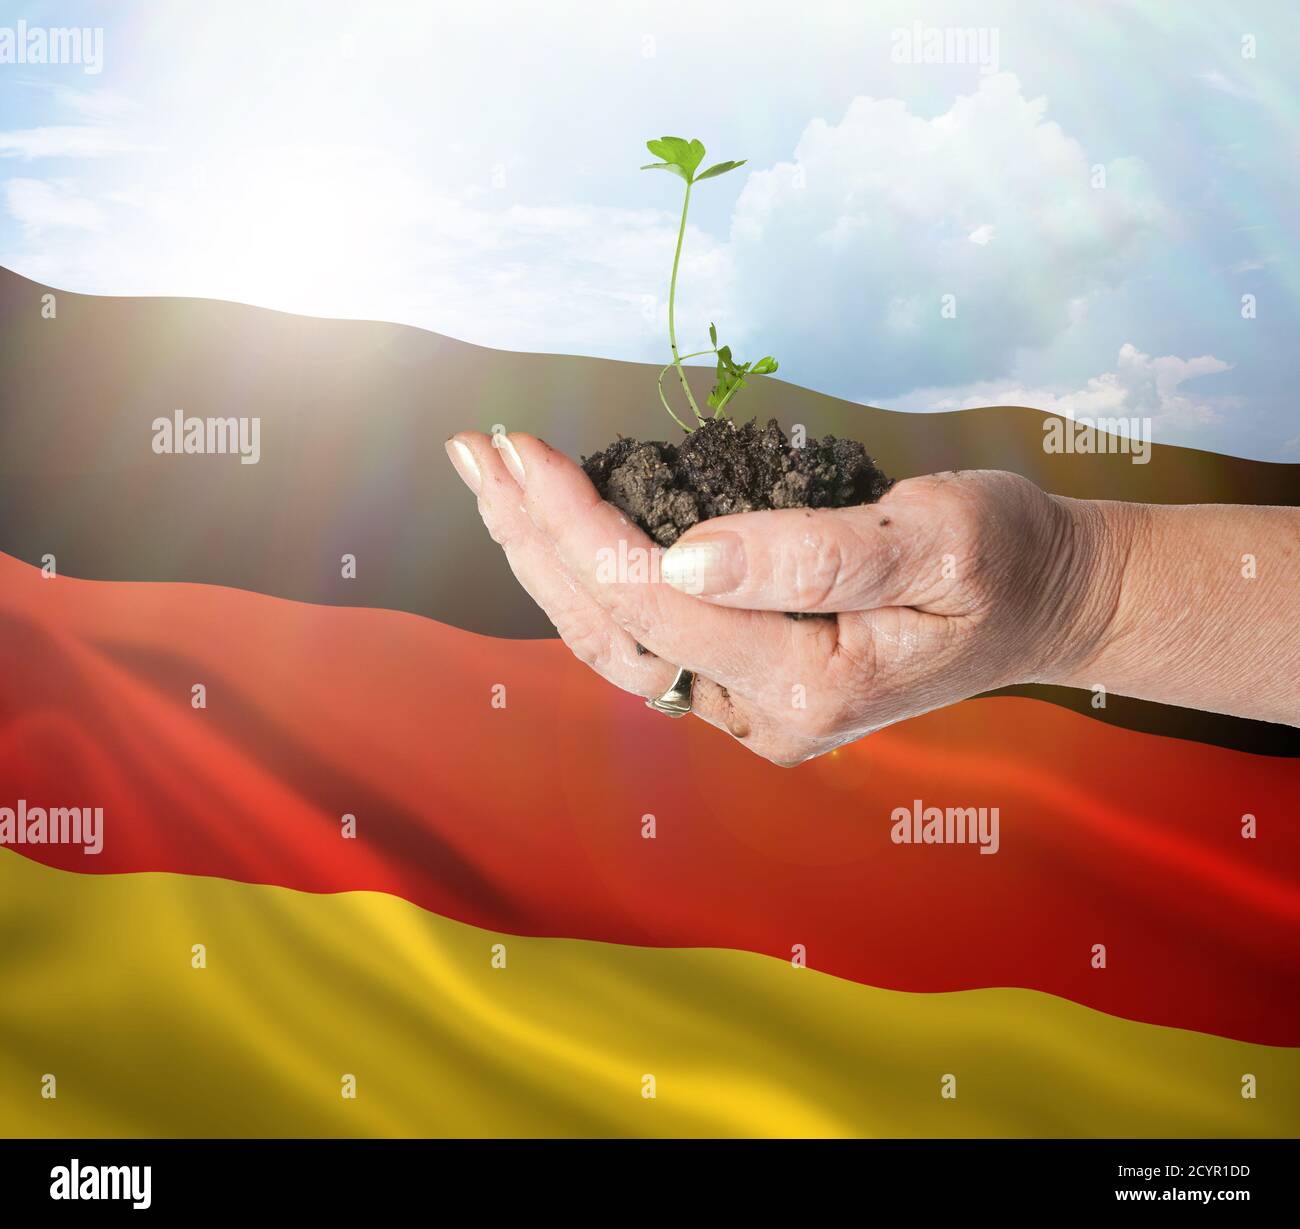 Germany growth and new beginning. Green renewable energy and ecology concept. Hand holding young plant. Stock Photo